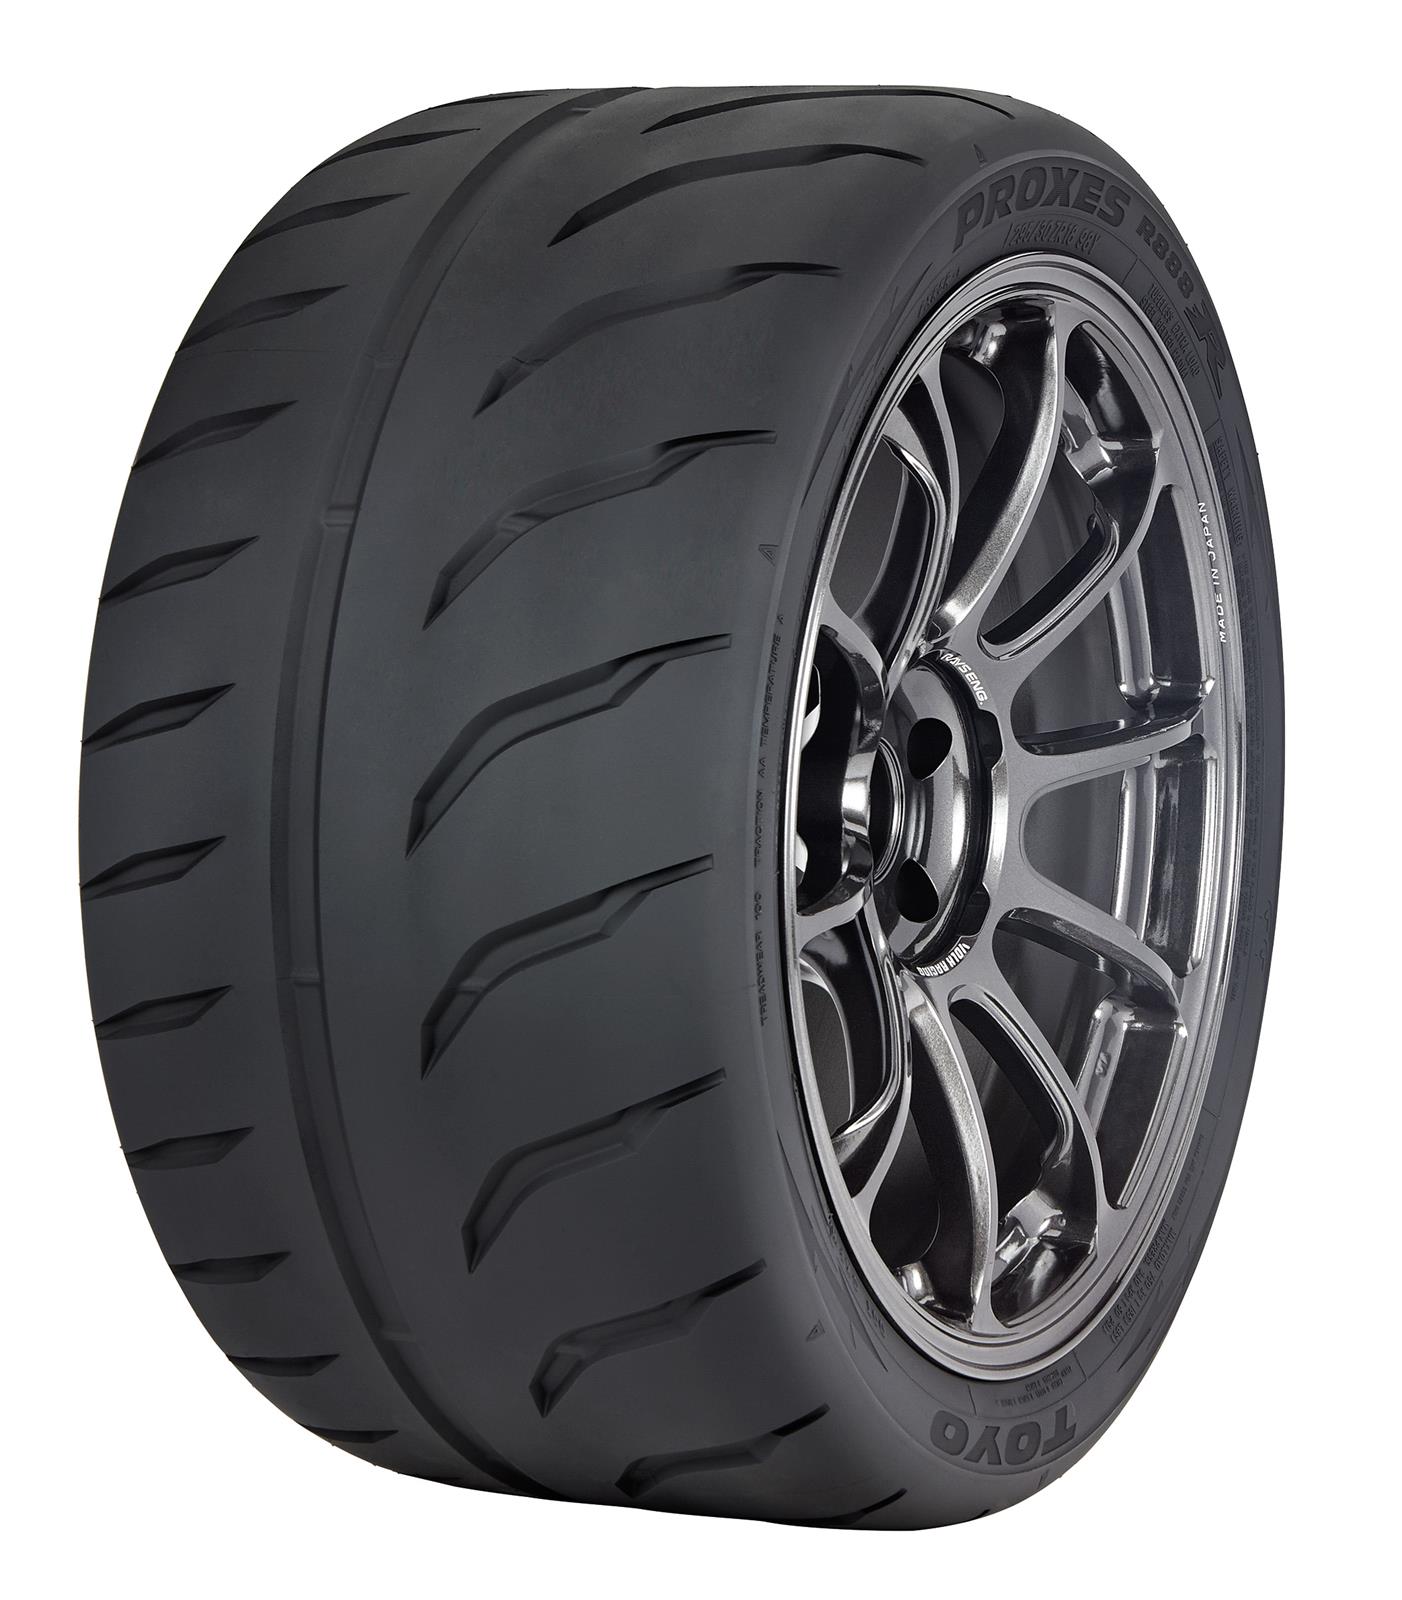 Toyo Tires 104570 Toyo Proxes R888R Tires | Summit Racing